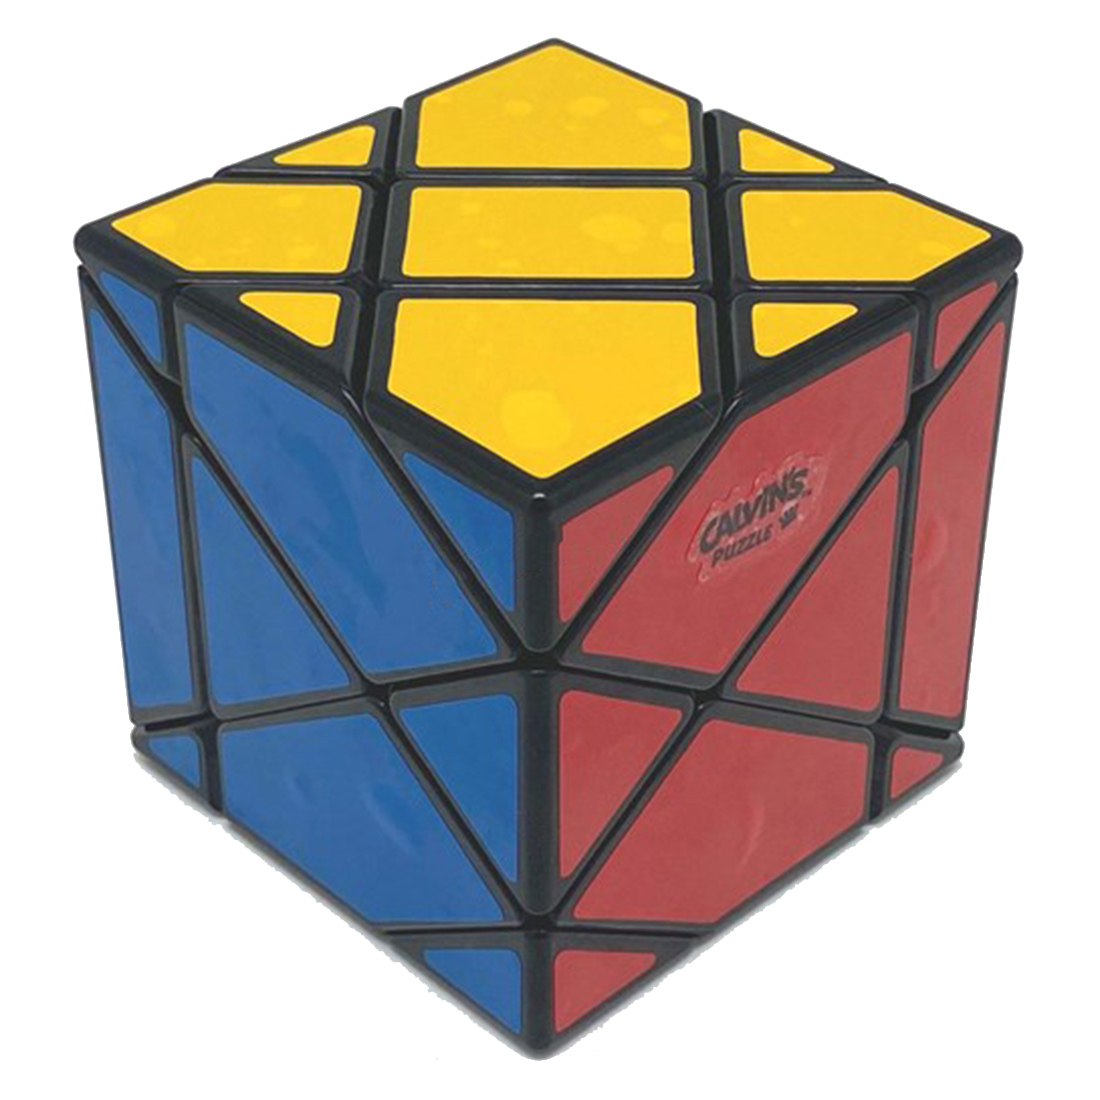 Calvin's Super Fisher 3x3 Speed Cube with 6-Color Stickers (Black/Limited Edition)